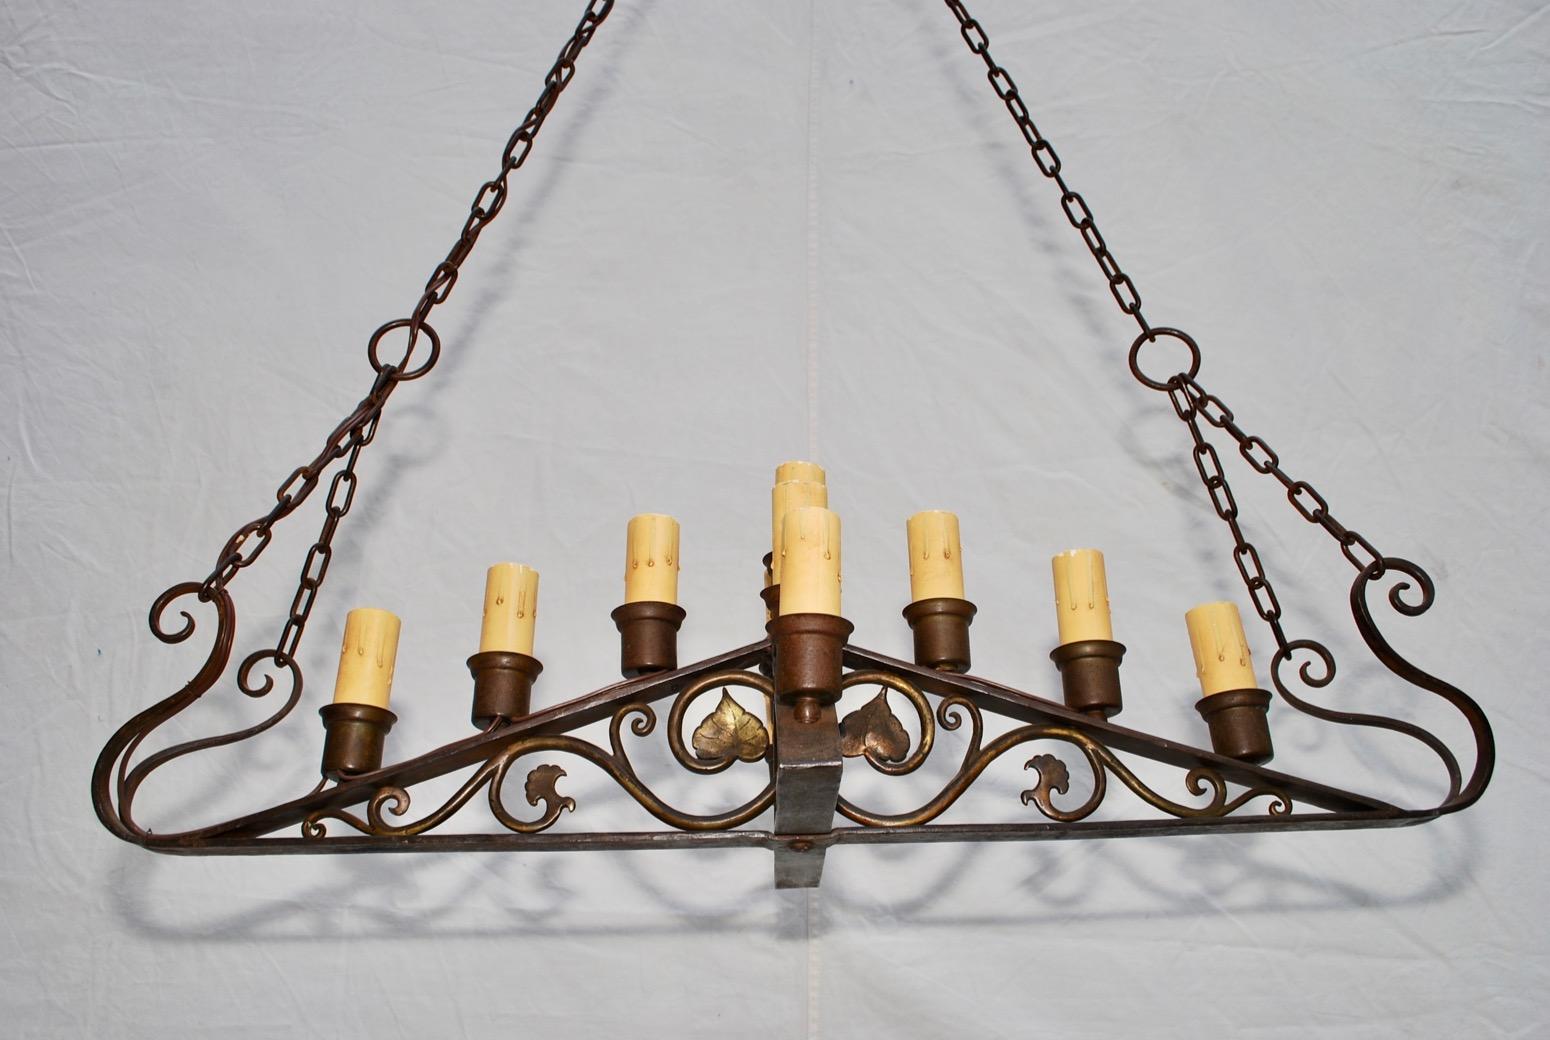 American Beautiful and Elegant 1920s Wrought Iron Chandelier